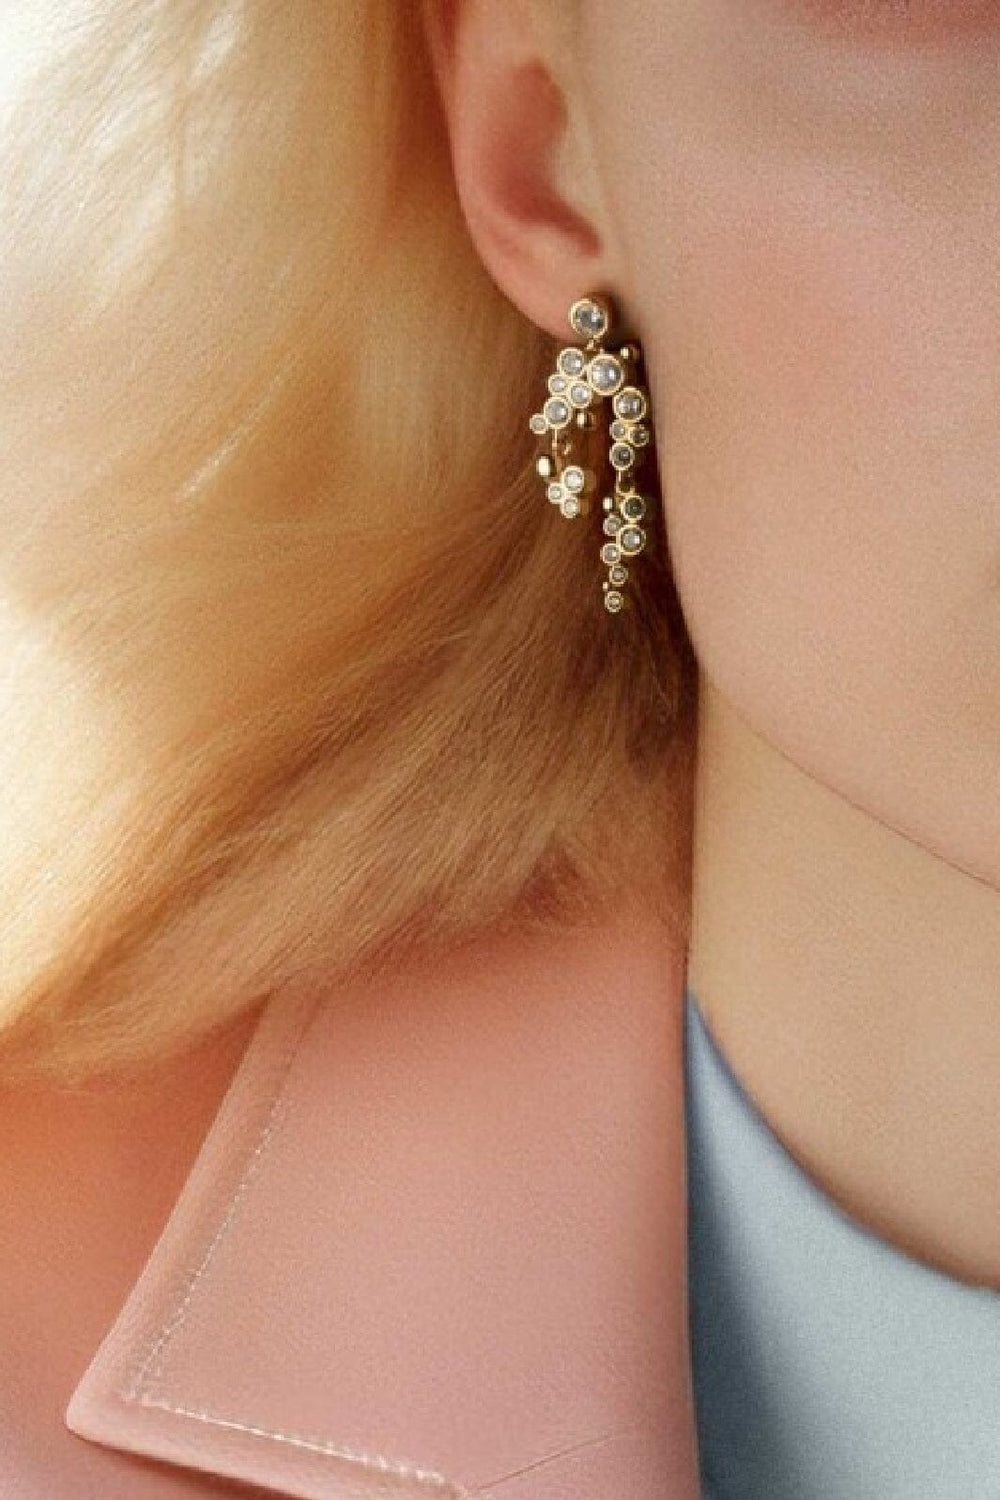 House Of Vincent - Lost Ember Earrings - Gilded 